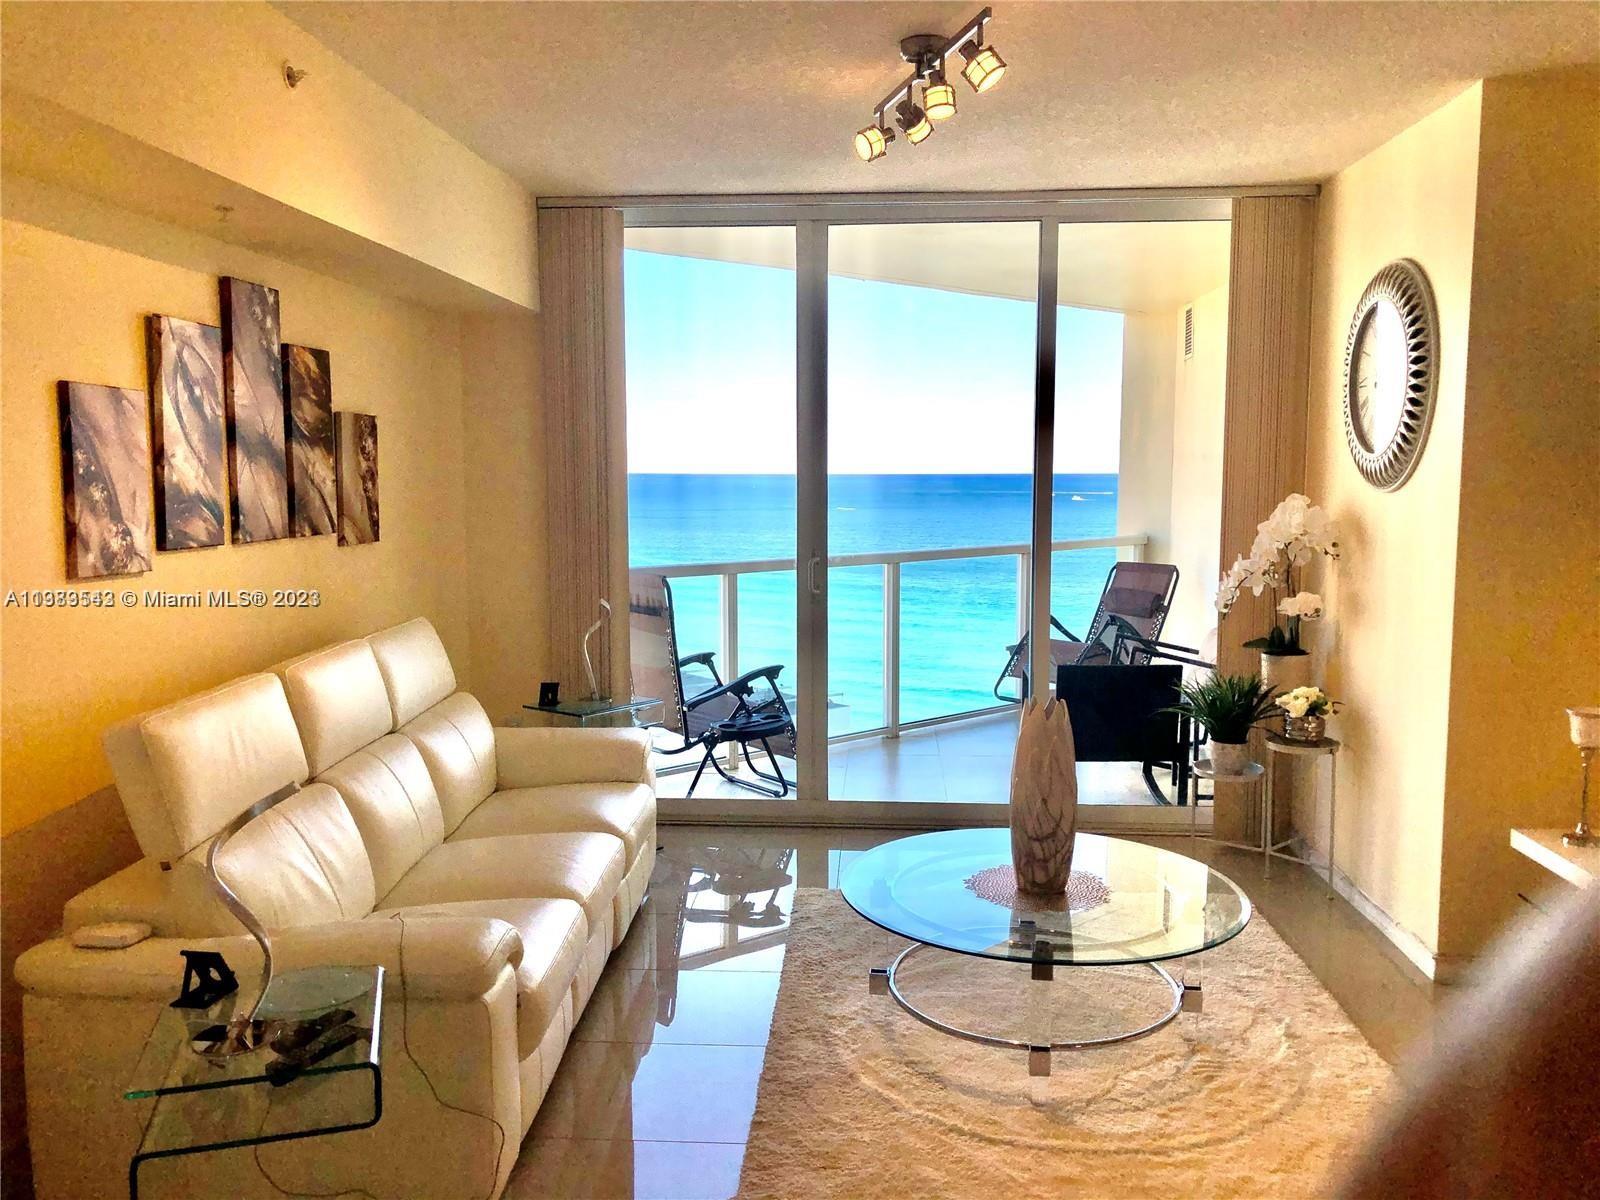 Welcome to La Perla in Sunny Isles Beach, Florida (ZIP code: 33160). Indulge in the epitome of luxury with this stunning oceanfront condo. Experience breathtaking ocean views from every corner of this fully furnished 1 bedroom, 1.5 bathroom apartment. Enjoy the direct ocean and Intracoastal views from two balconies with a desirable northeast exposure. The unit boasts a state-of-the-art kitchen with stainless steel appliances, elegant marble floors, and the convenience of a washer and dryer. This full-service building offers 24-hour security, ensuring your peace of mind. With its central location, you'll find yourself in close proximity to the renowned Aventura Mall and major highways. Don't miss this exceptional opportunity to embrace the sun-soaked lifestyle of Sunny Isles Beach.